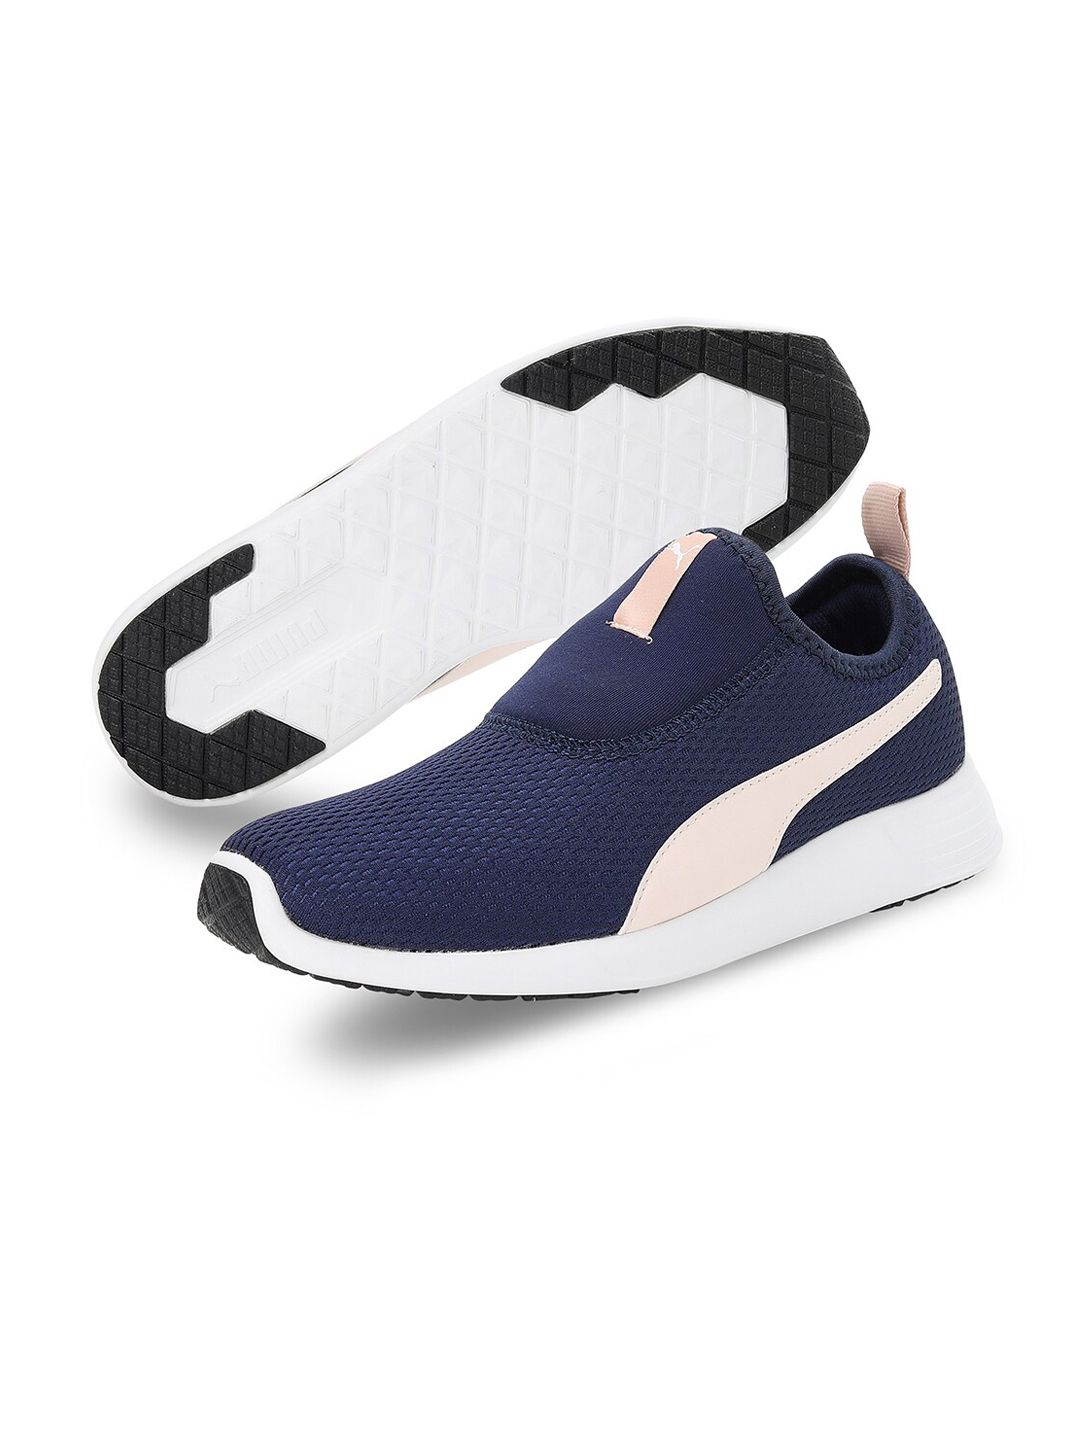 Puma Women Navy Blue Woven Design Slip-On Sneakers Price in India